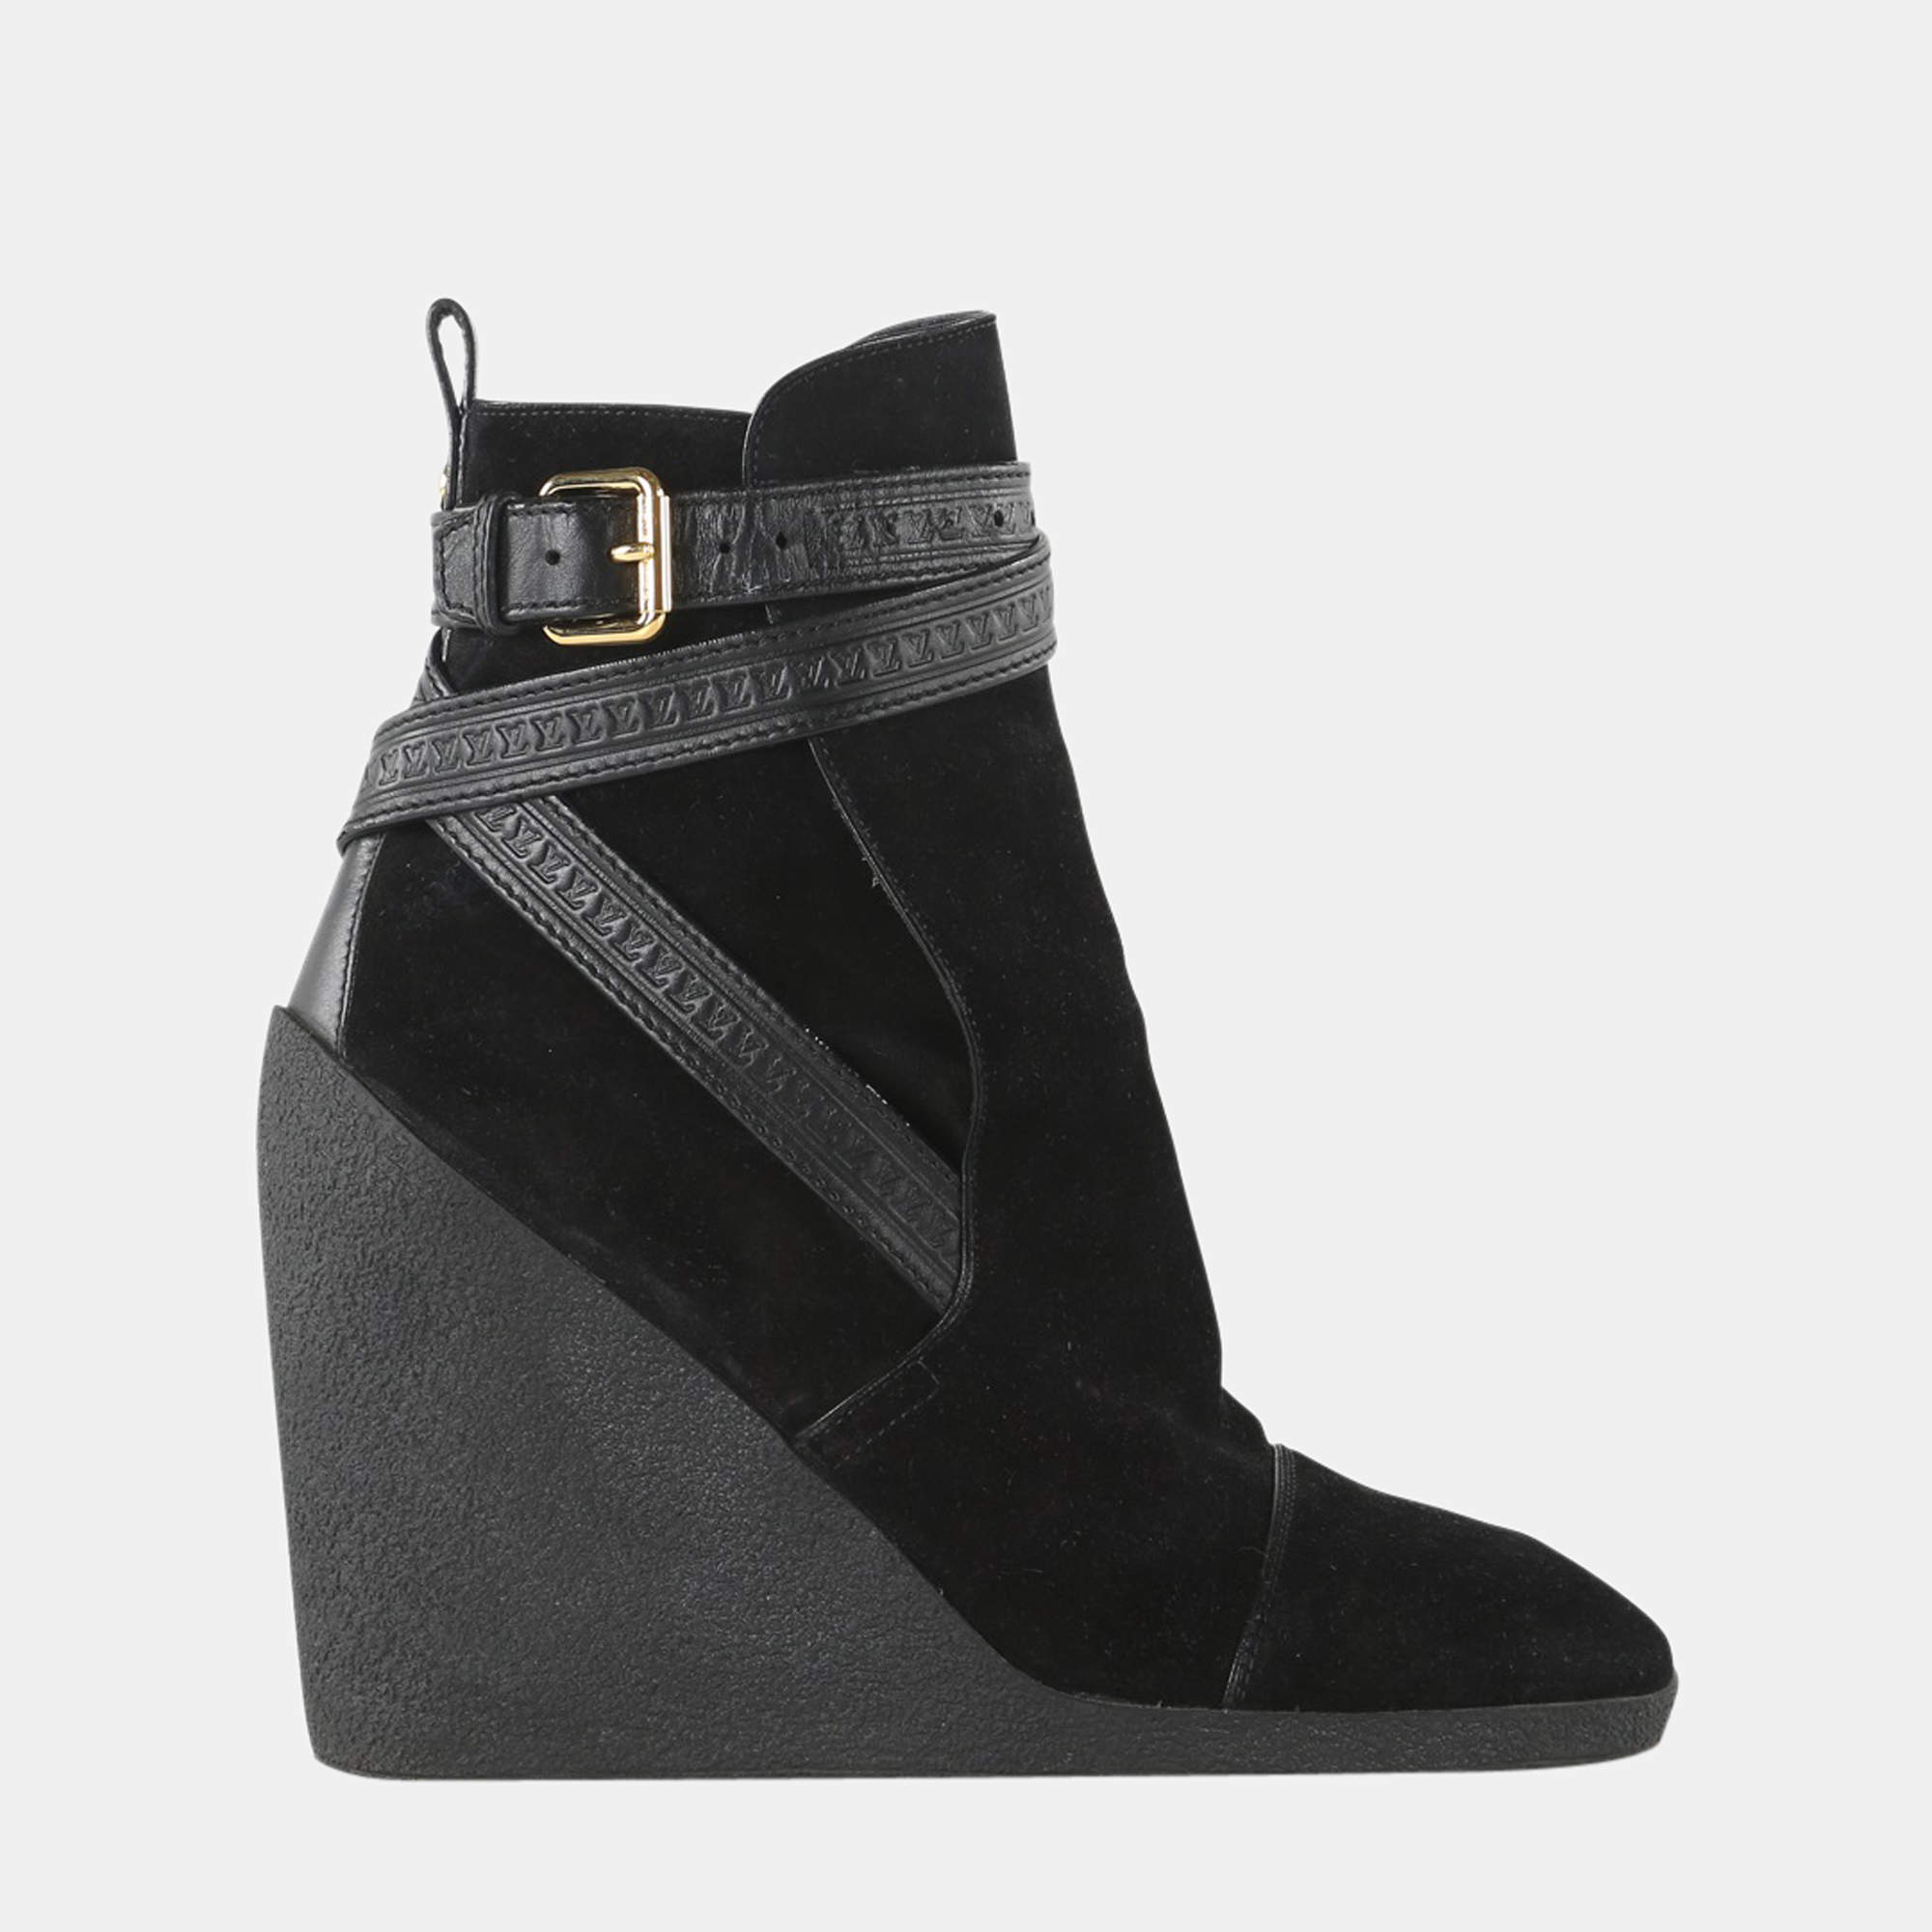 Louis Vuitton Ranger Ankle Boot!! For Sale Now